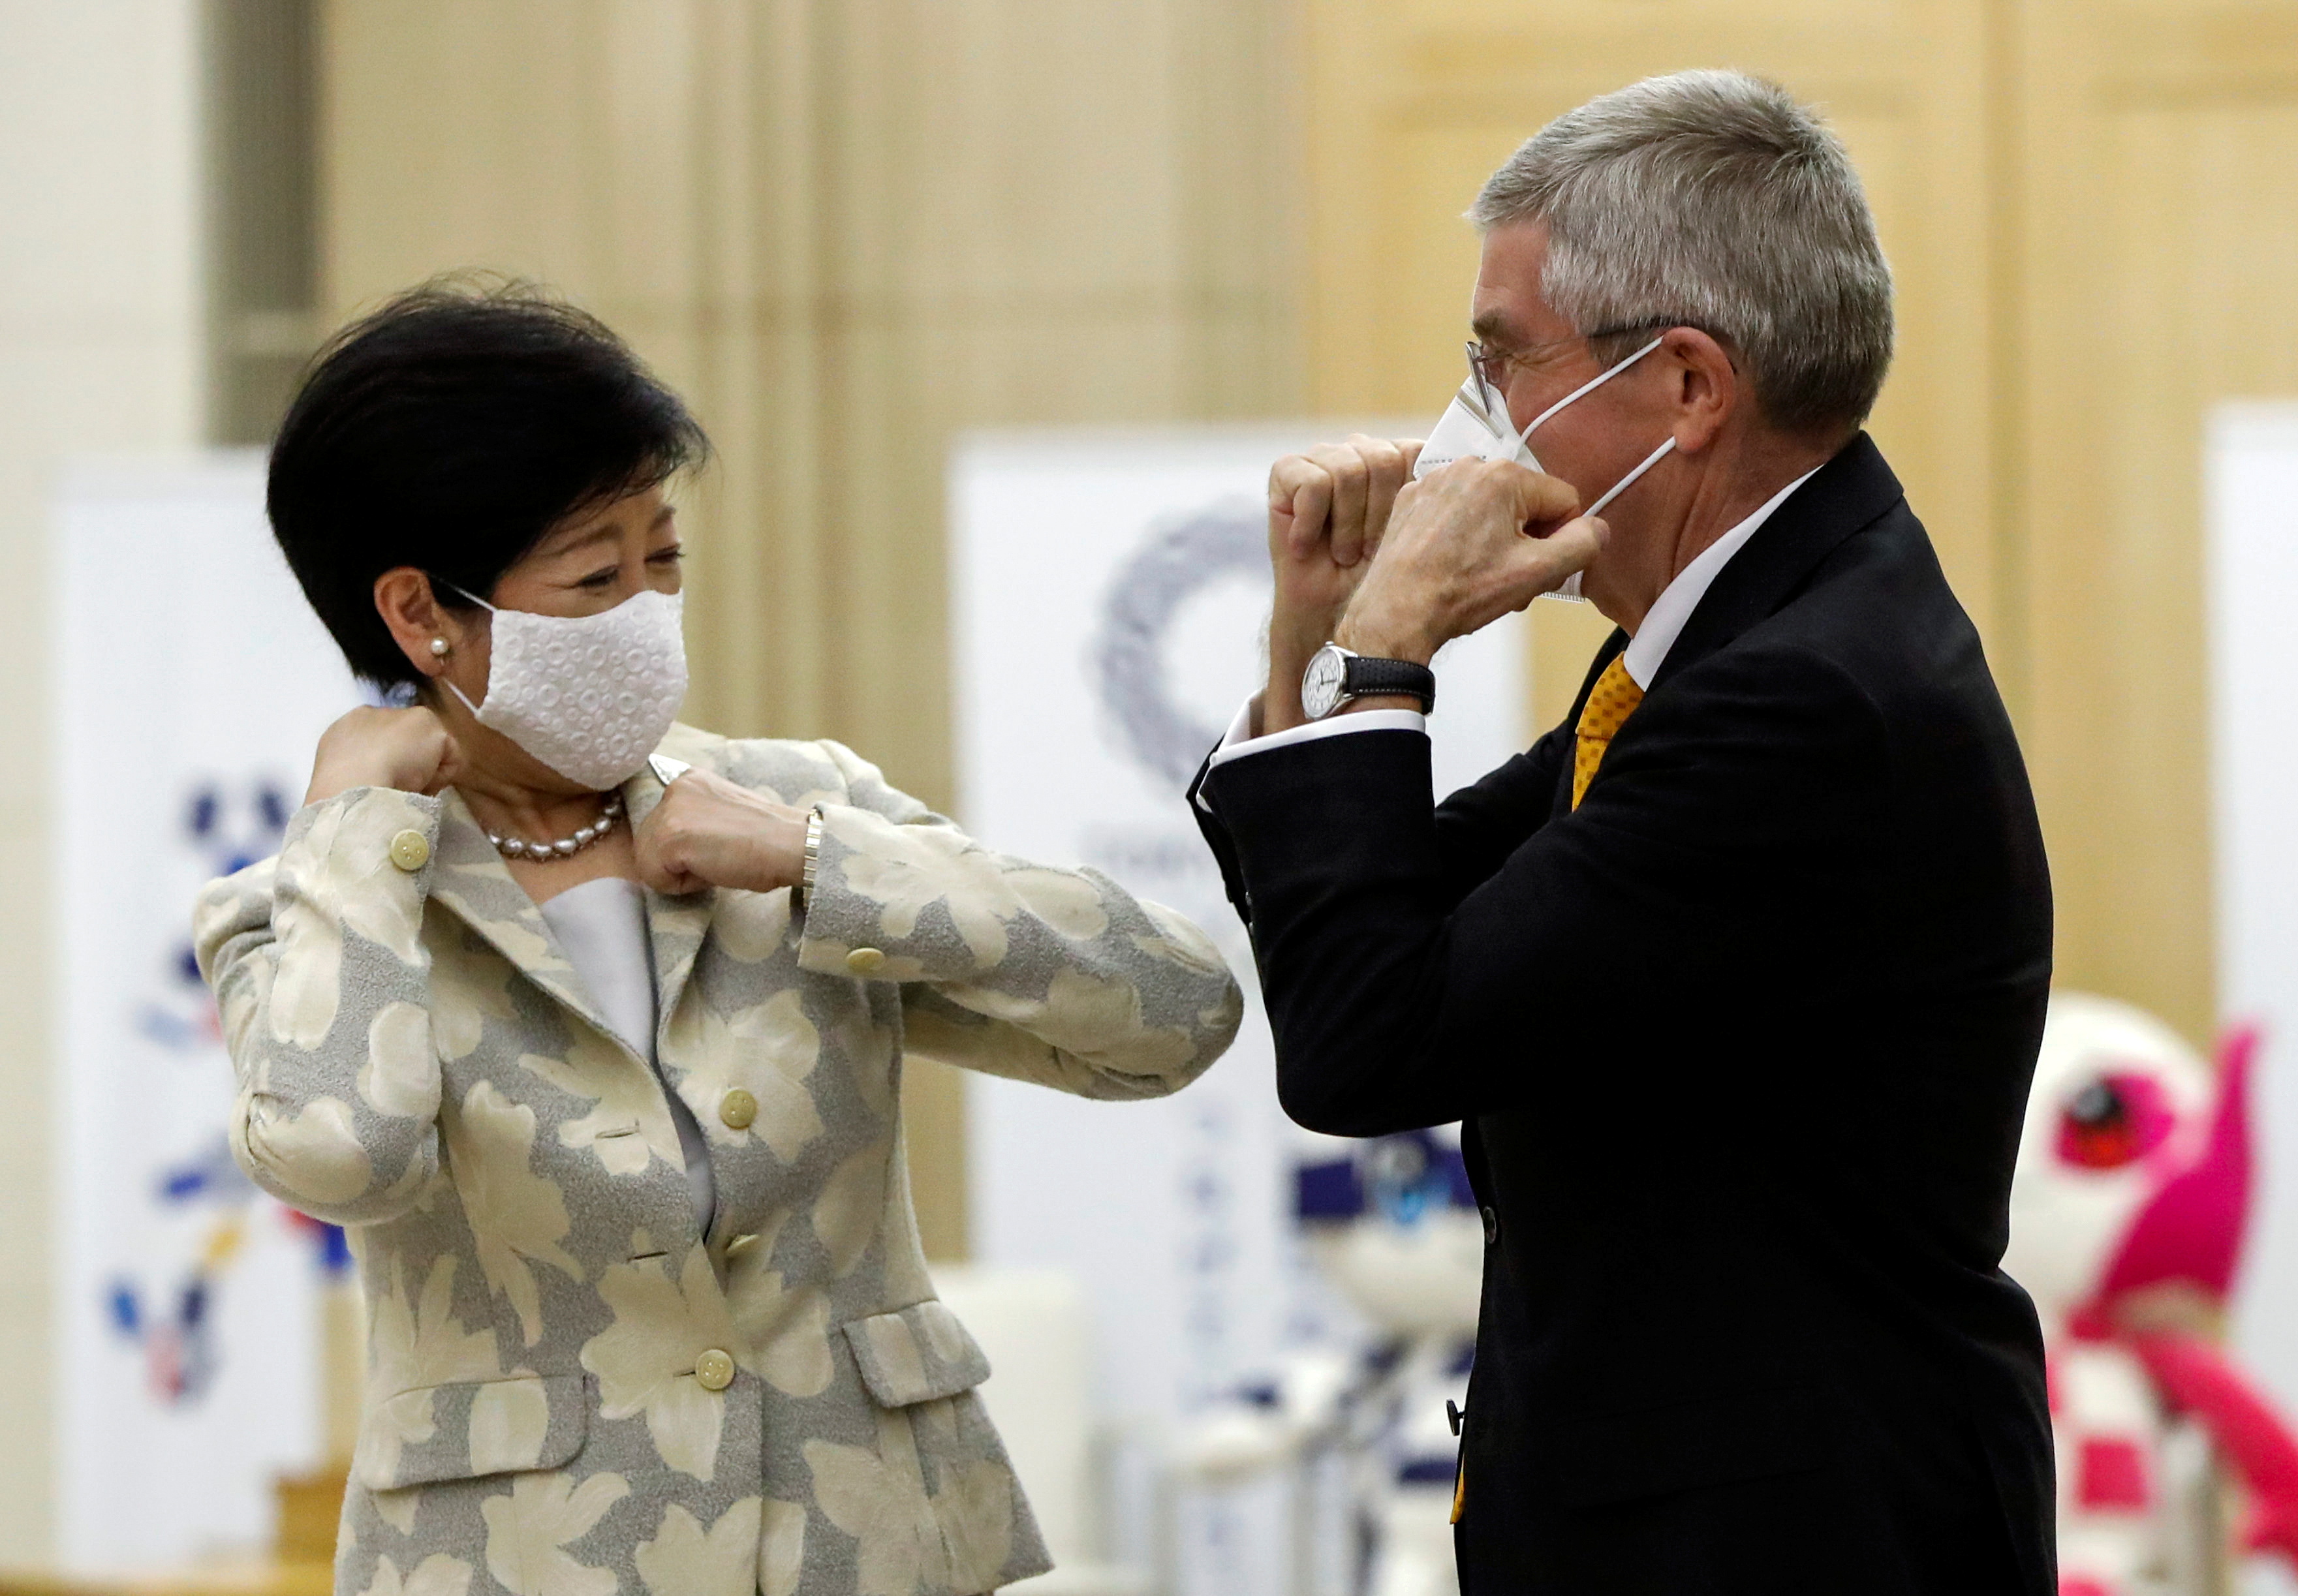 Tokyo Governor Yuriko Koike and Thomas Bach, President of the International Olympic Committee (IOC), bump elbows at the start of their talks at Tokyo Metropolitan Government Office Building in Tokyo